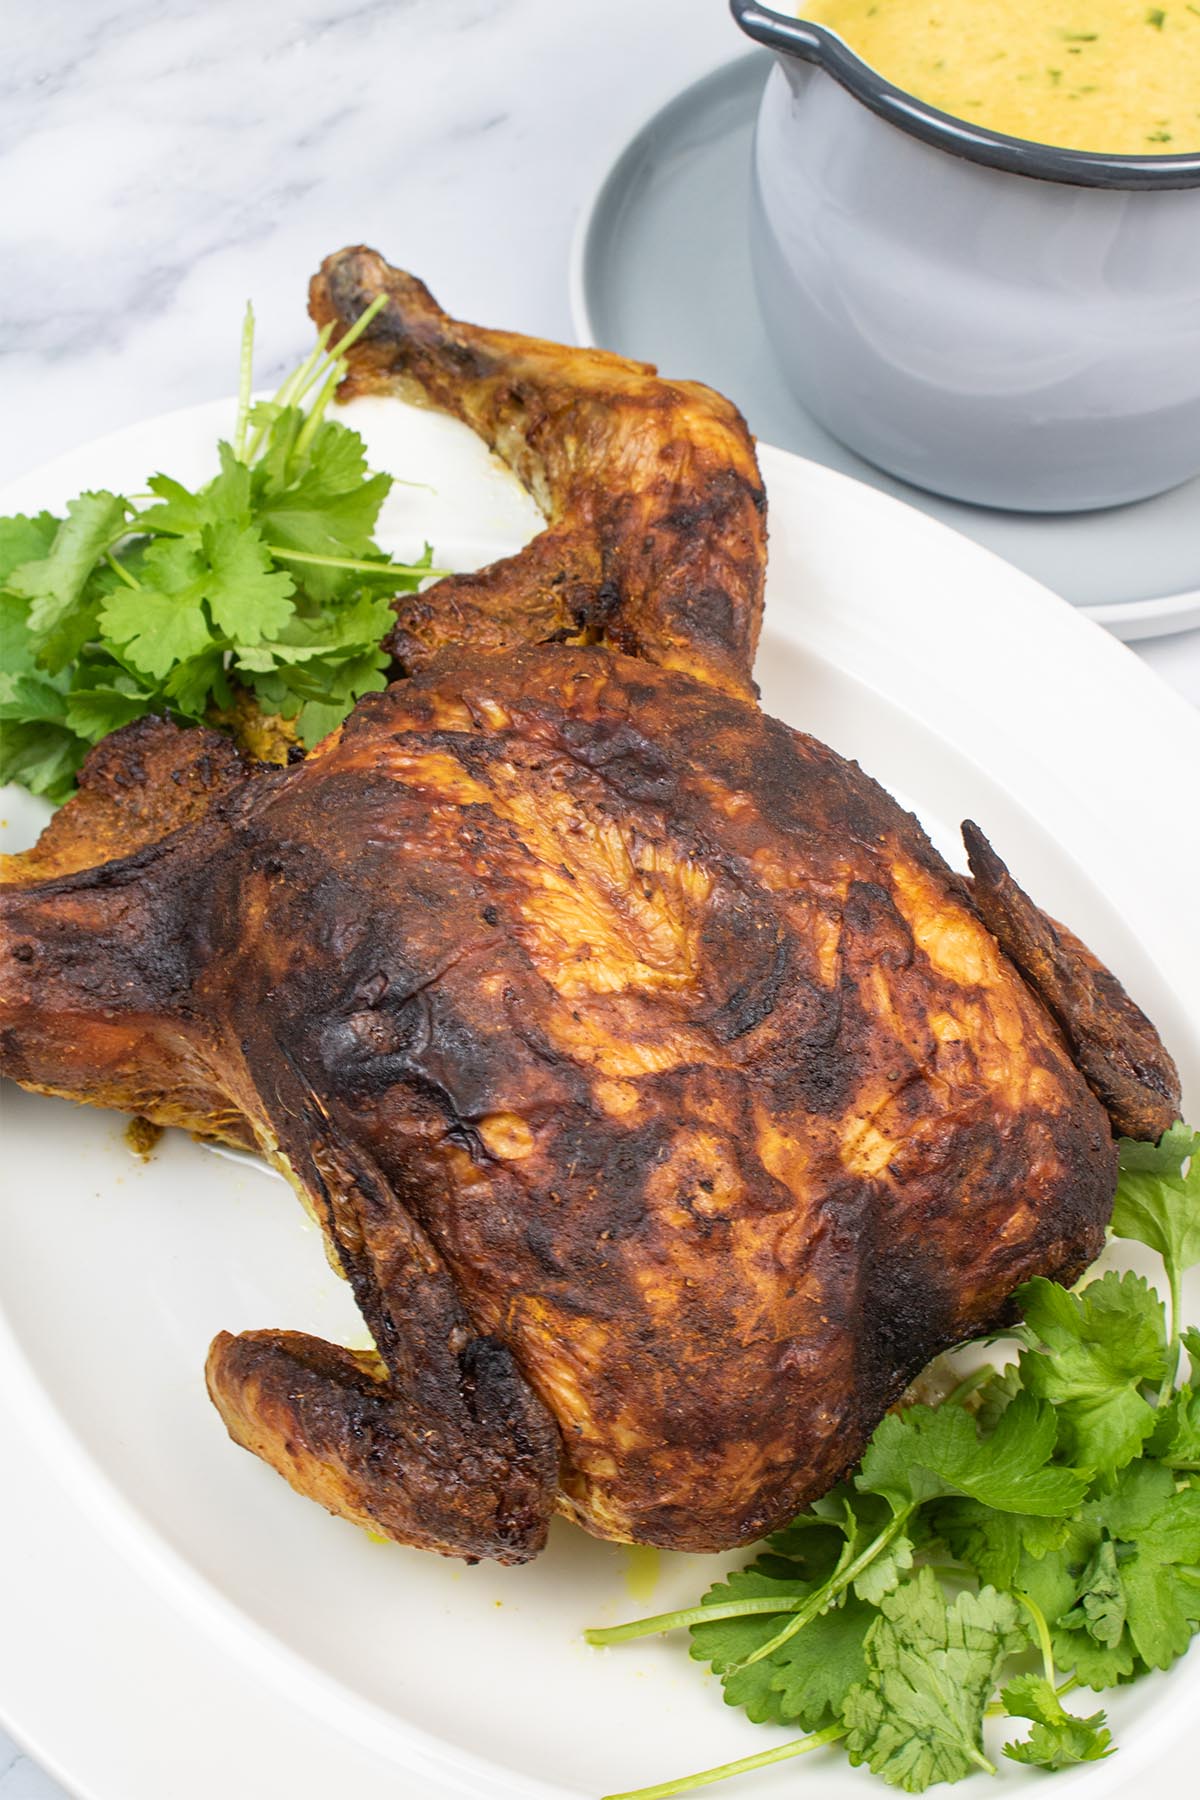 Tandoori roast chicken on a white platter with coriander garnish and sauce in a grey jug on the side.